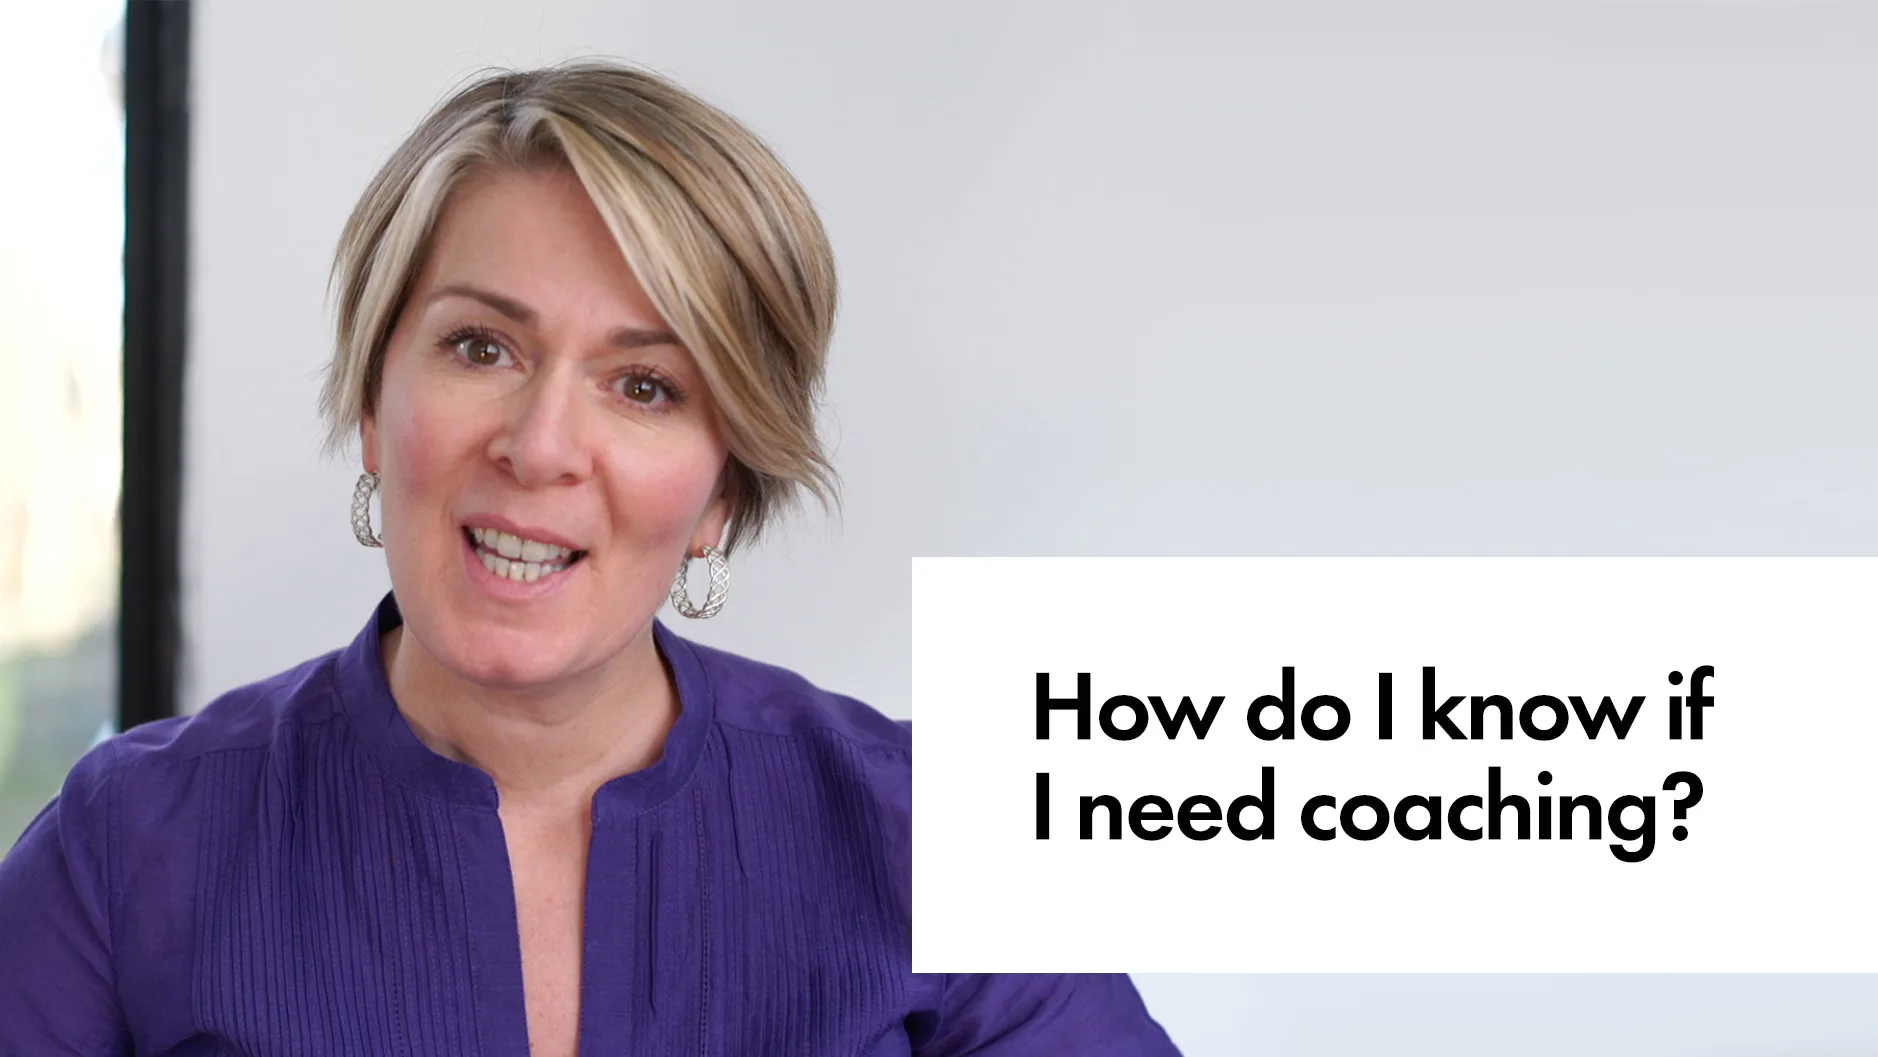 Featured image for “How do I know if I need coaching?”